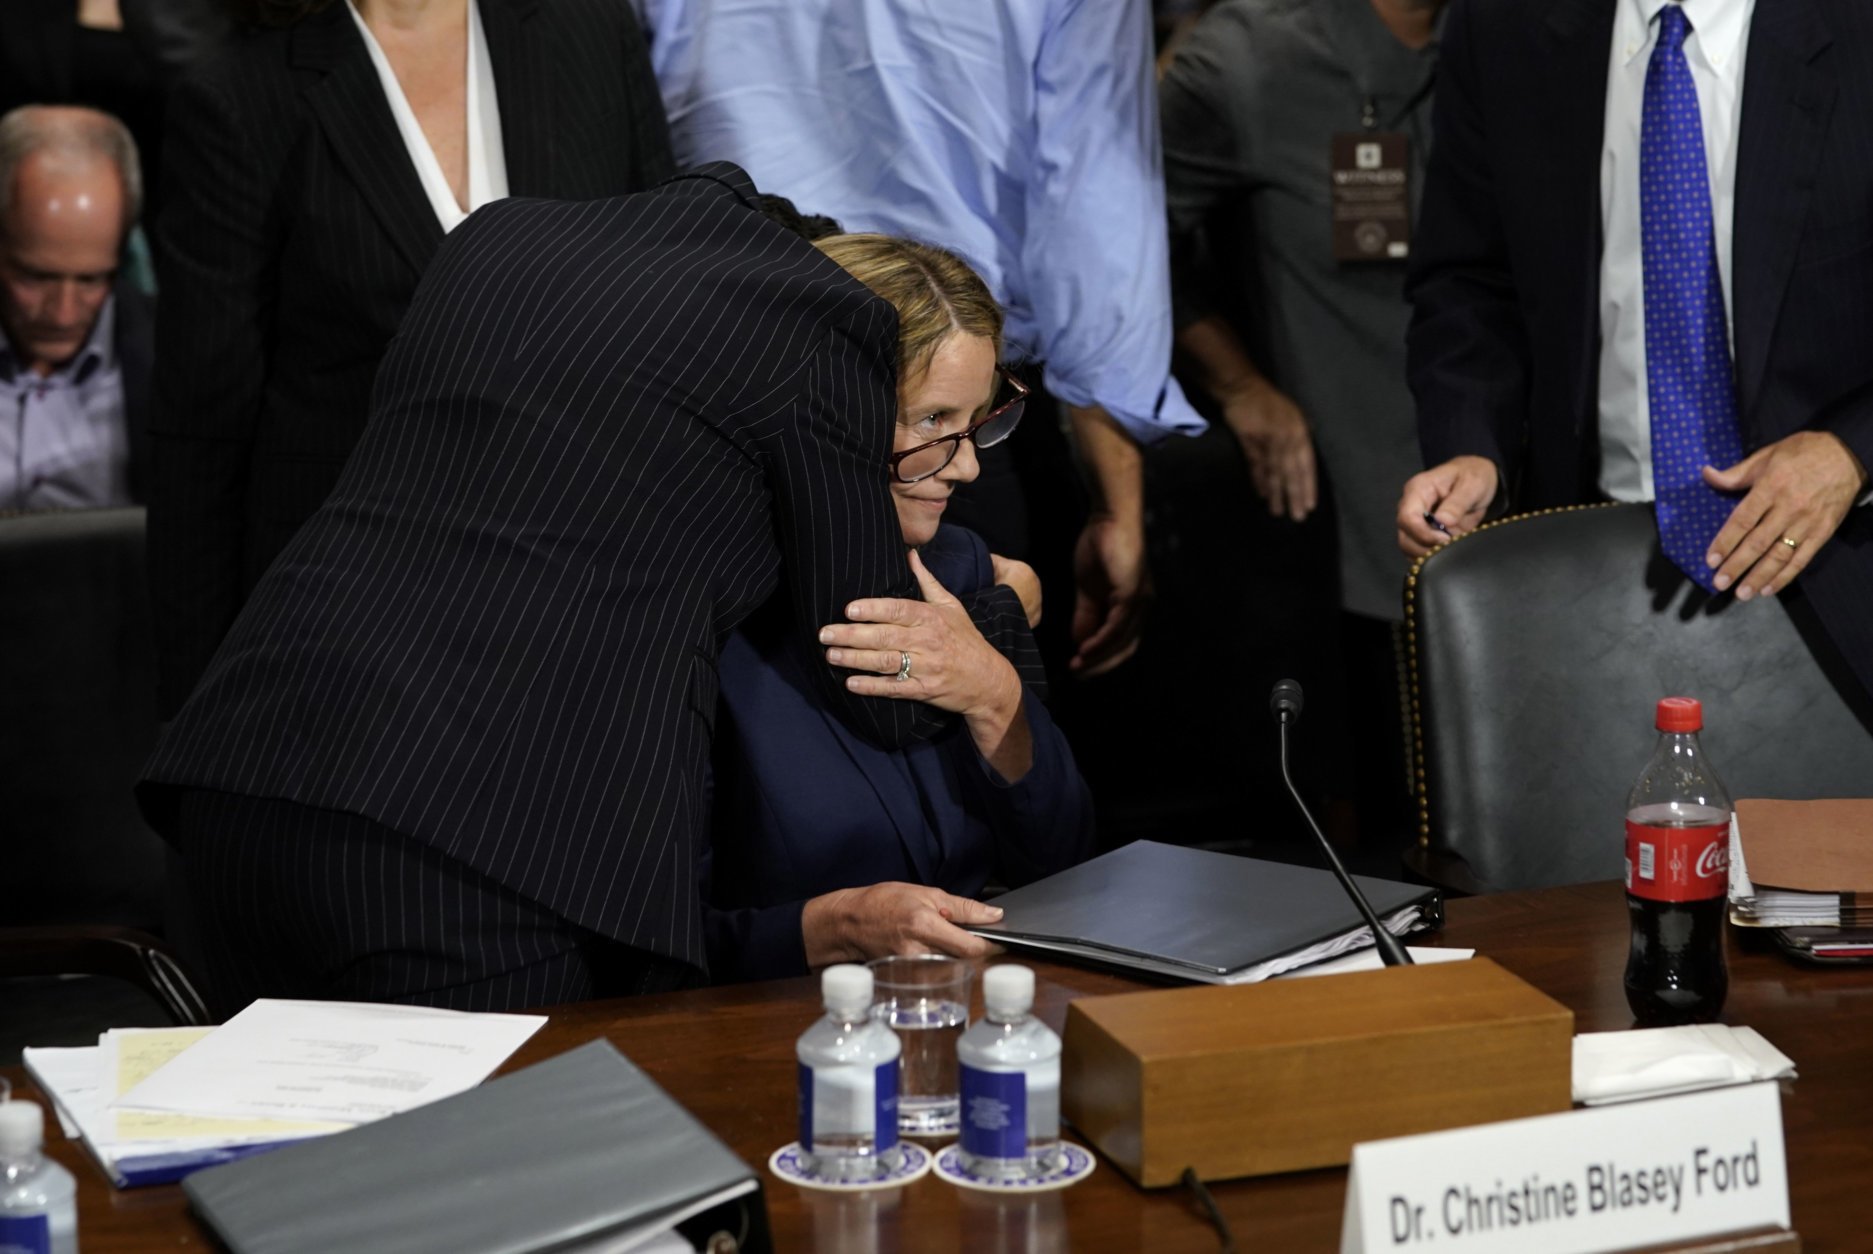 Christine Blasey Ford is hugged by her attorney Debra Katz after she finished testifying before the Senate Judiciary Committee on Capitol Hill in Washington, Thursday, Sept. 27, 2018. (AP Photo/Andrew Harnik, Pool)